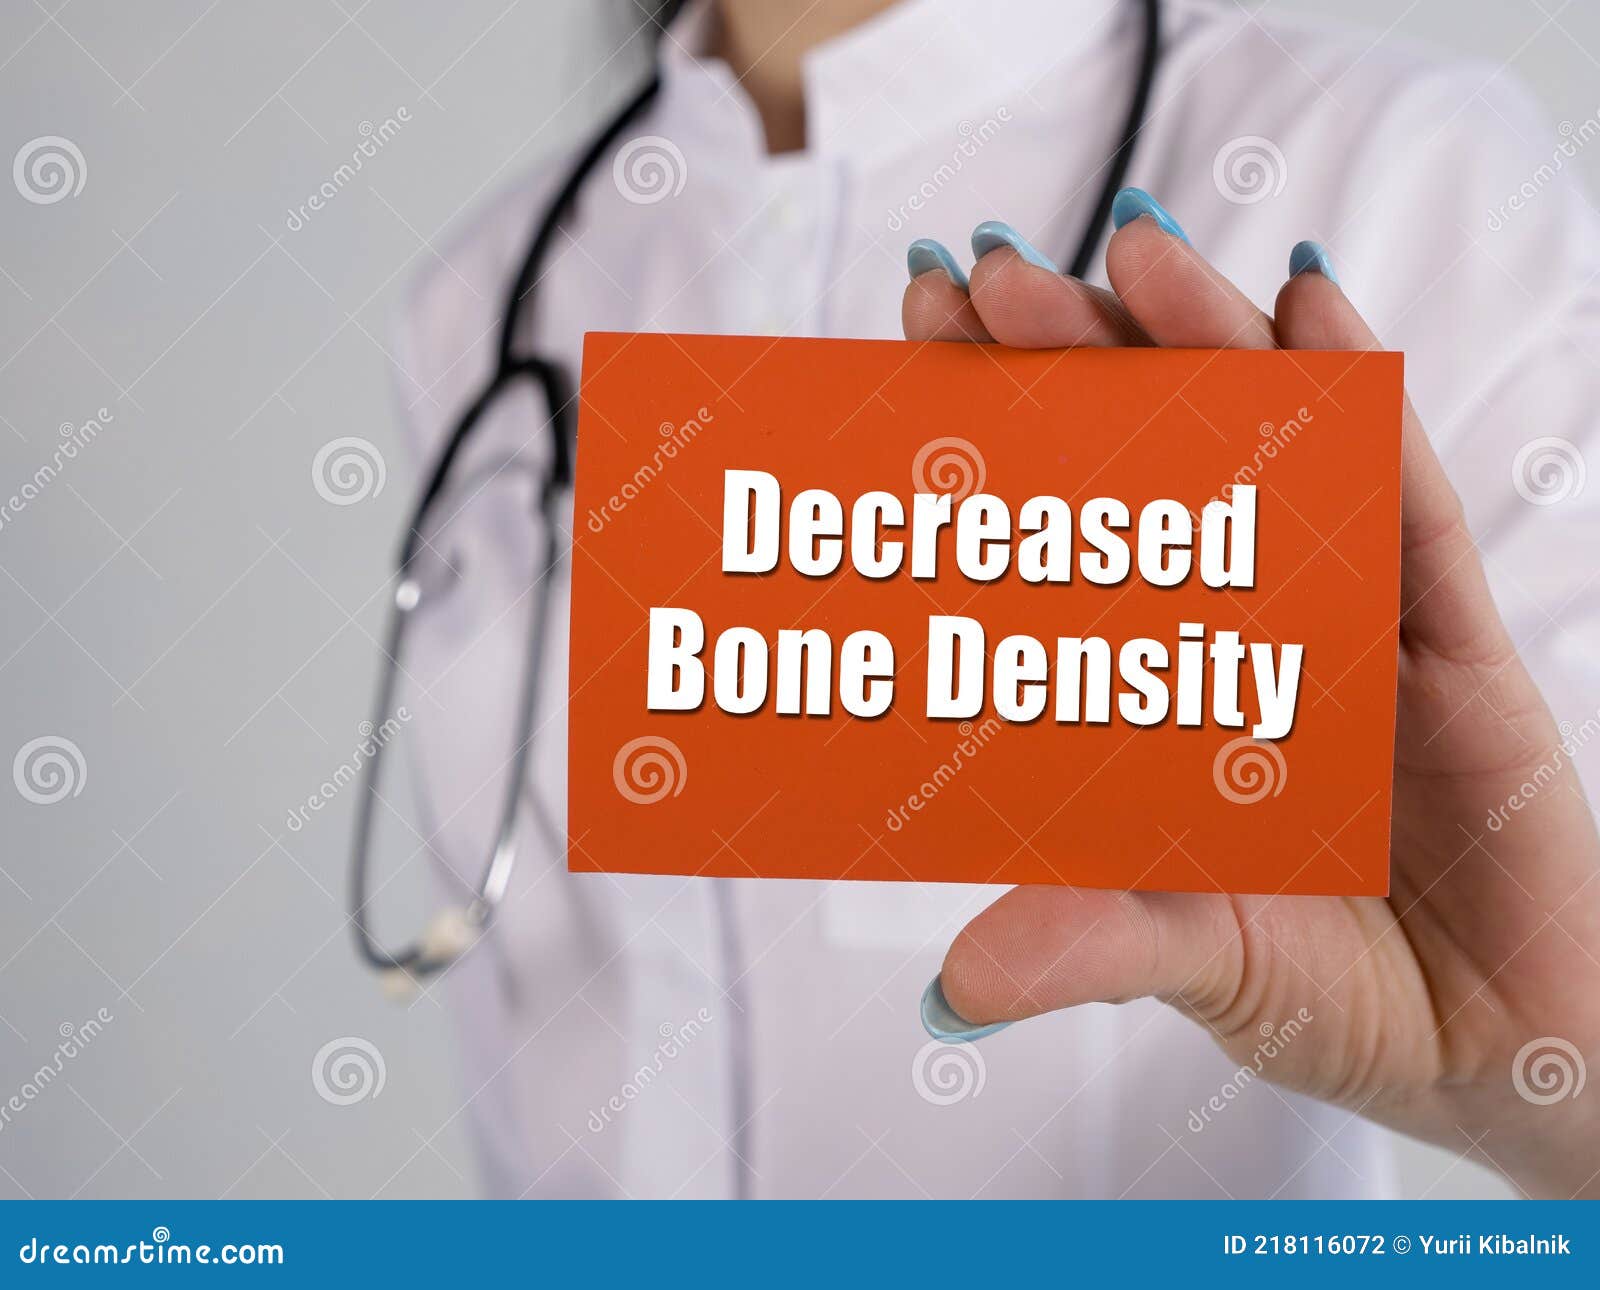 decreased bone density sign on the page